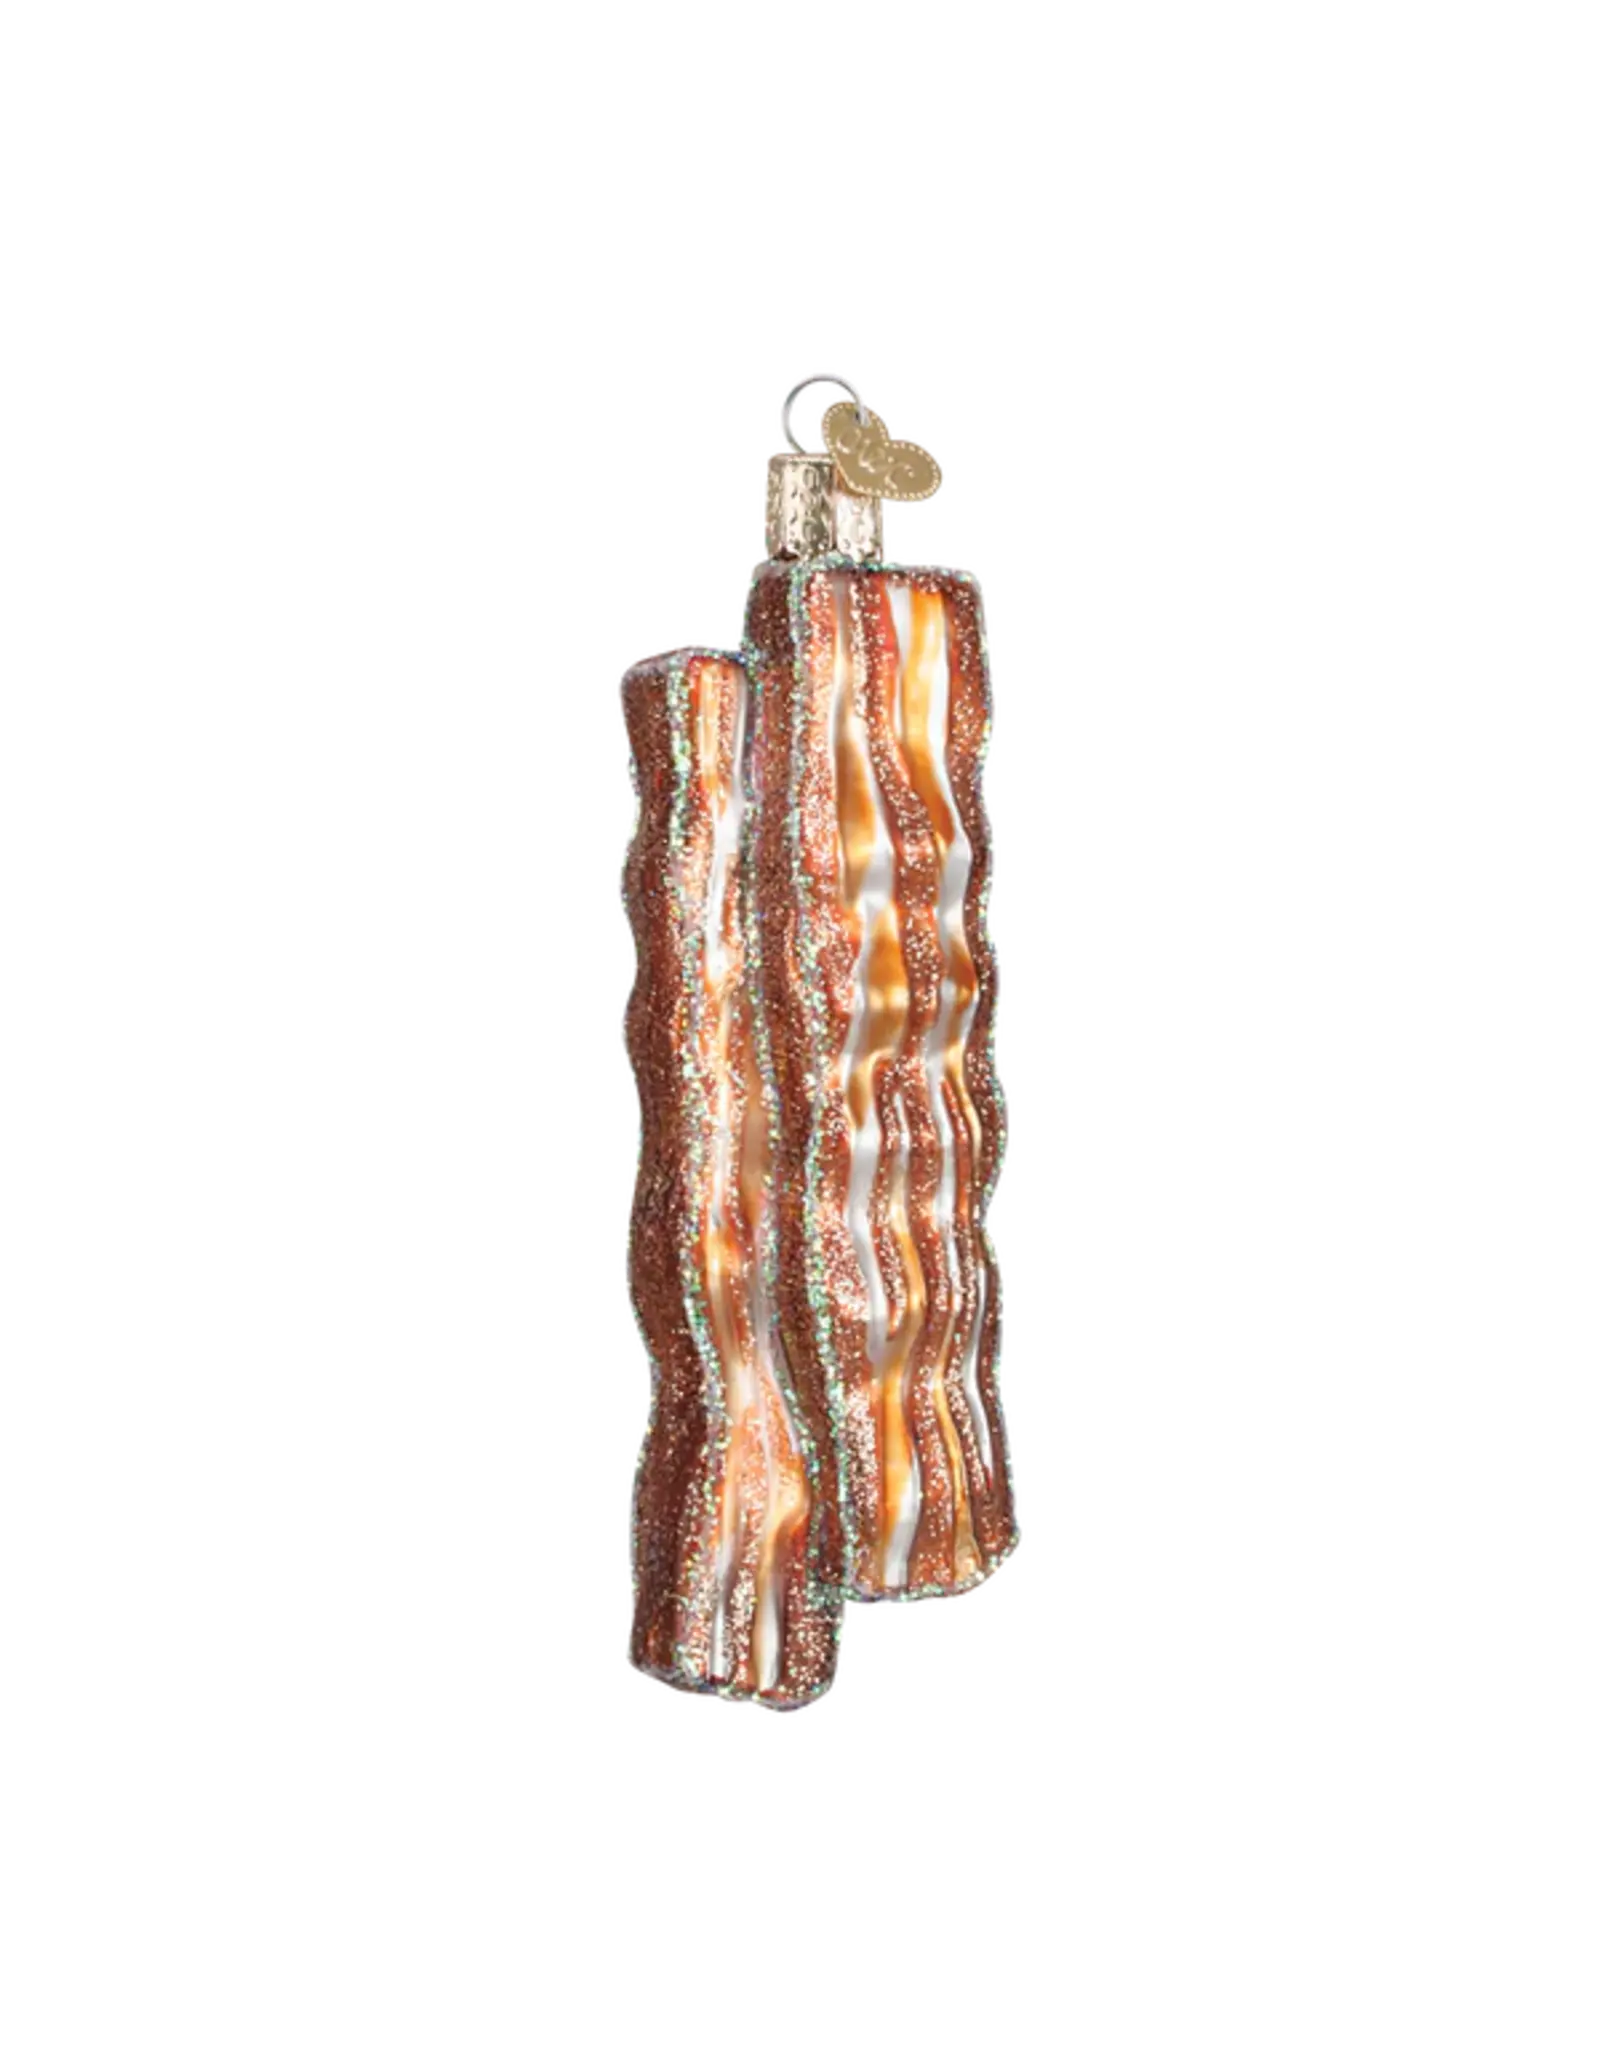 Old World Christmas Bacon Strips Ornament